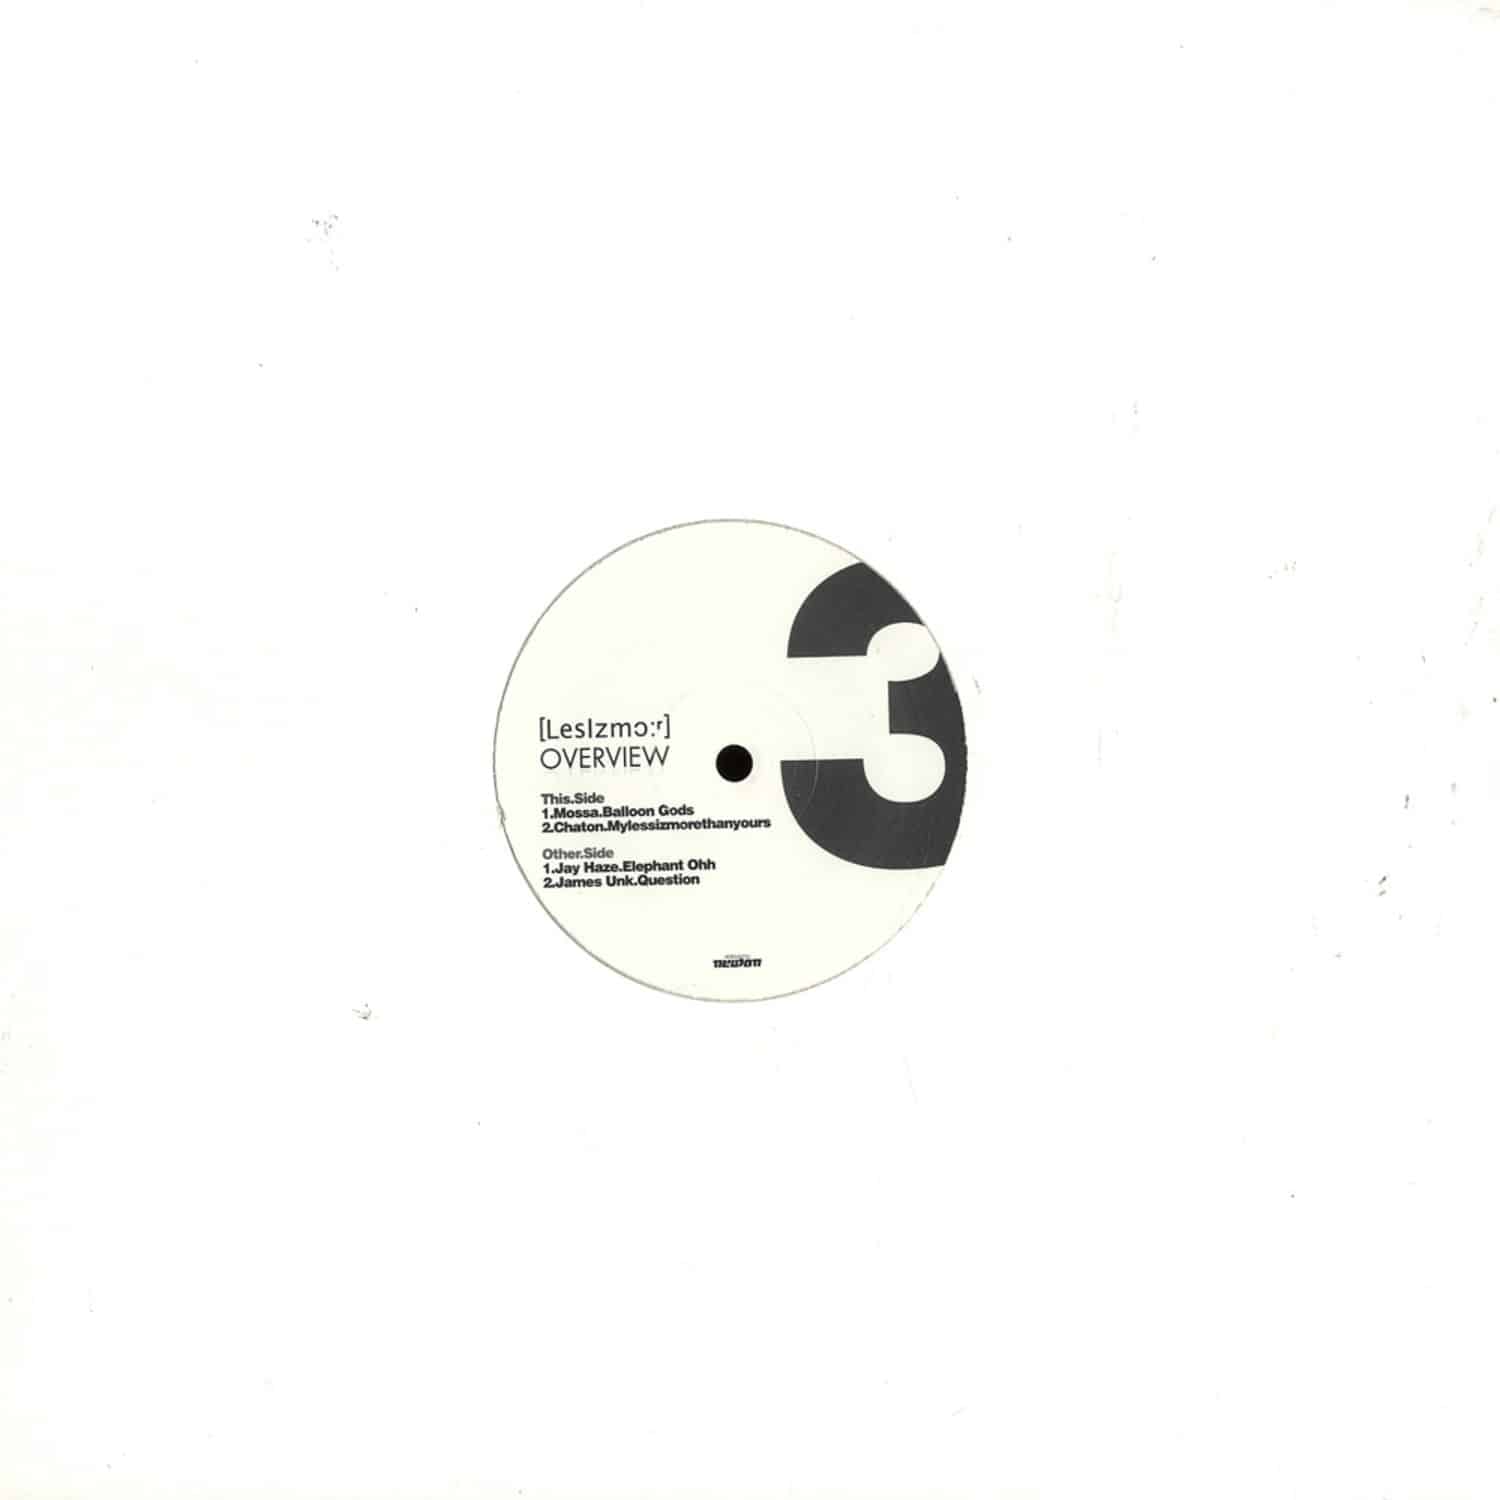 Jay Haze / James Unk / Mossa / Chaton - OVERVIEW EP 3/4